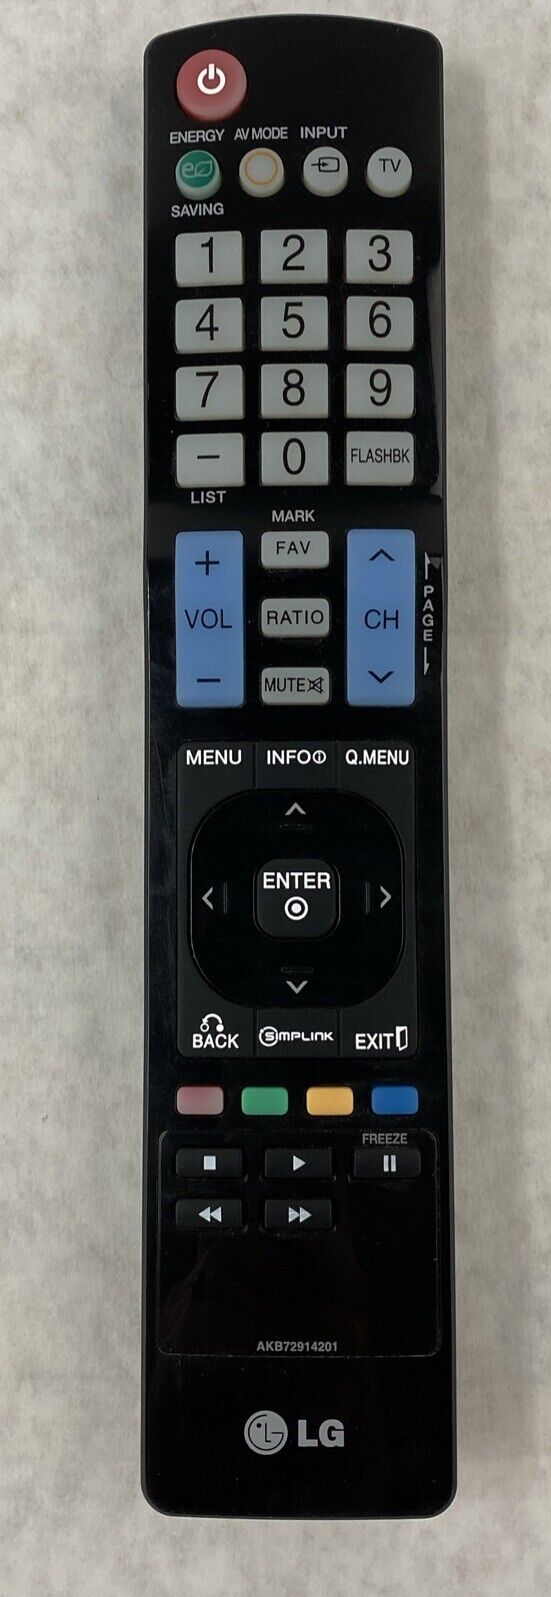 Genuine LG AKB72914240 Remote Control for TV Television WORKING